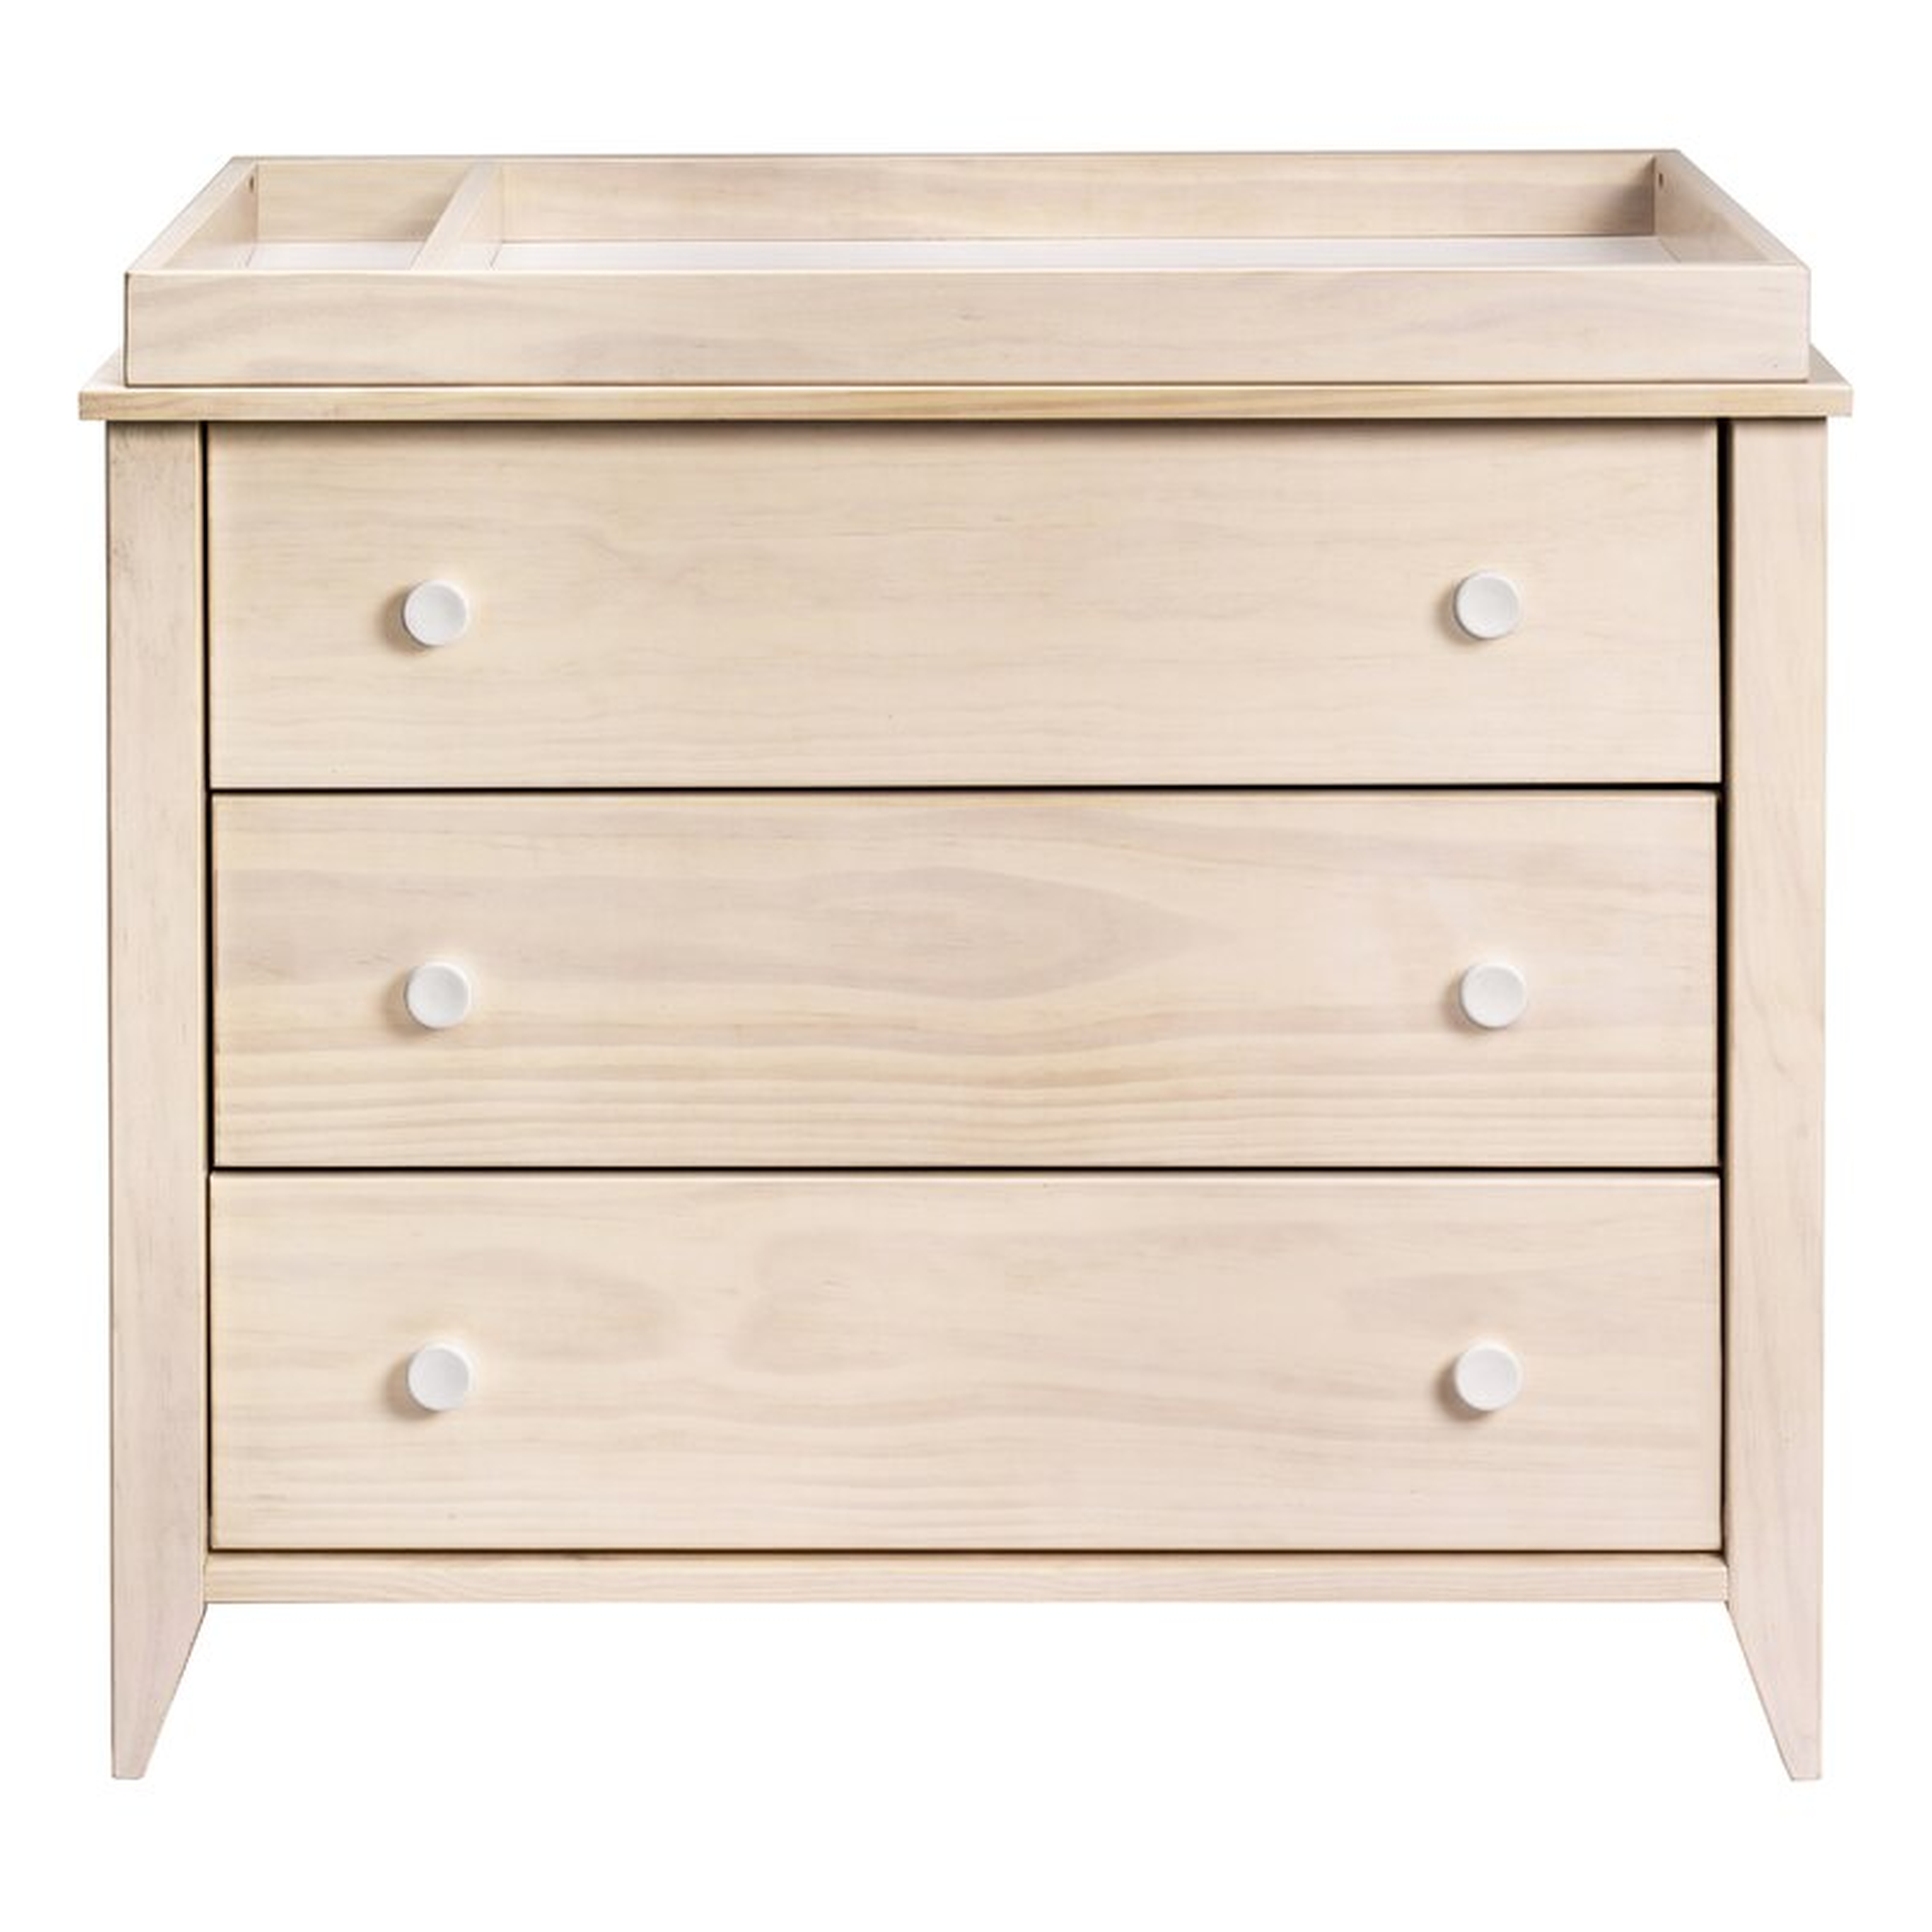 babyletto Sprout Changing Table Dresser Color: Washed Natural/White - Perigold